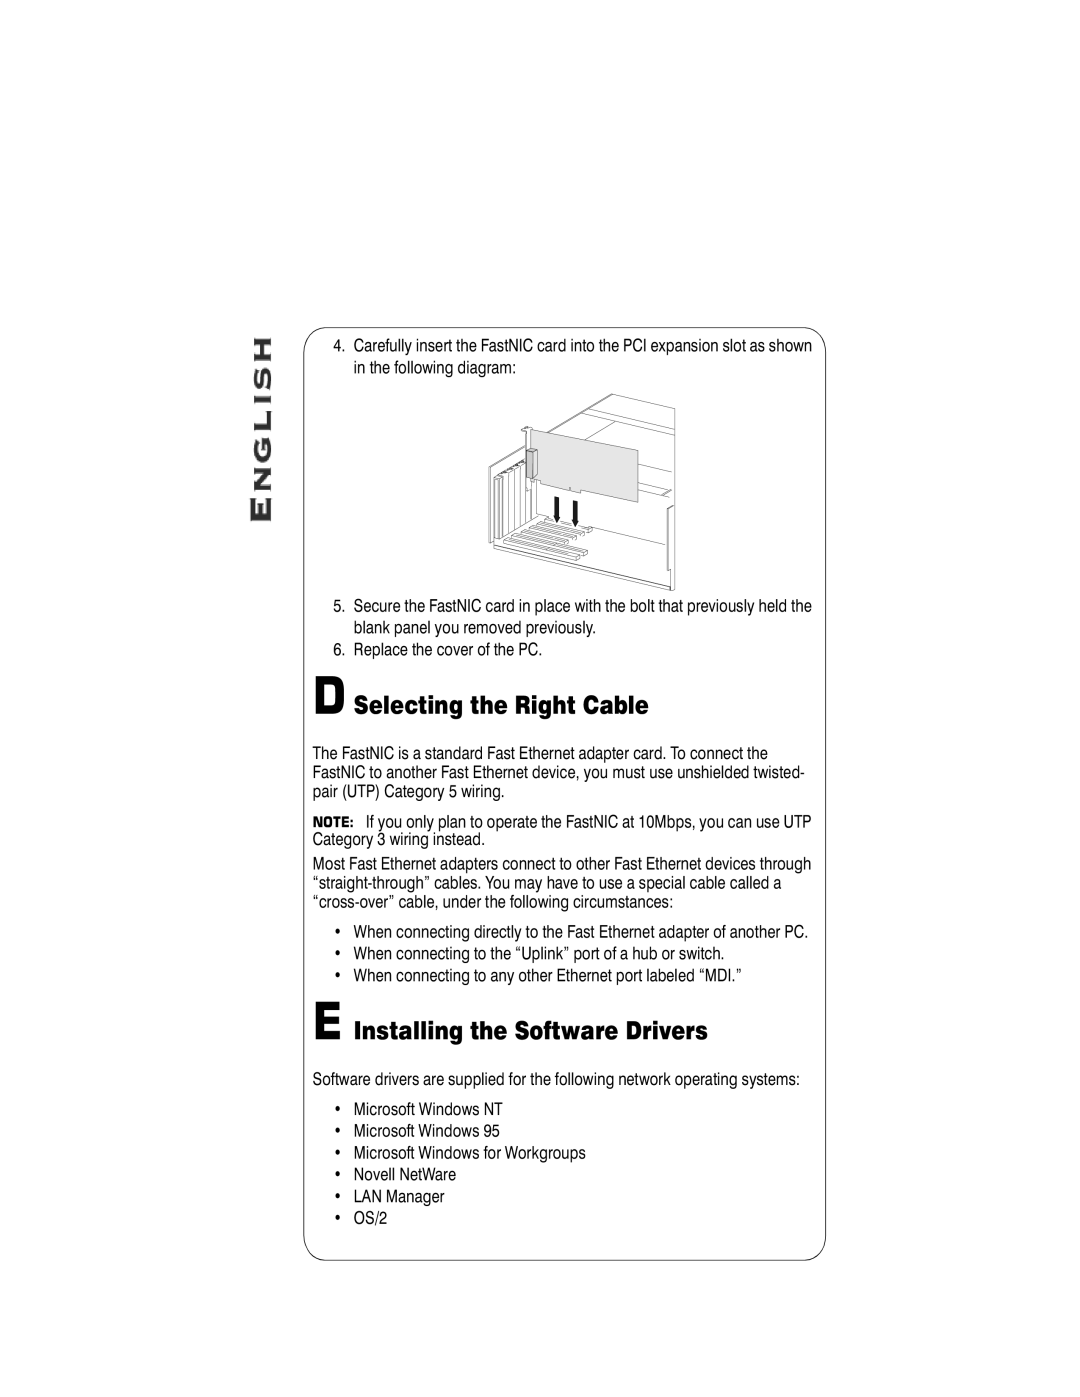 Matrox Electronic Systems 10574-MT-0102 manual D Selecting the Right Cable, E Installing the Software Drivers 